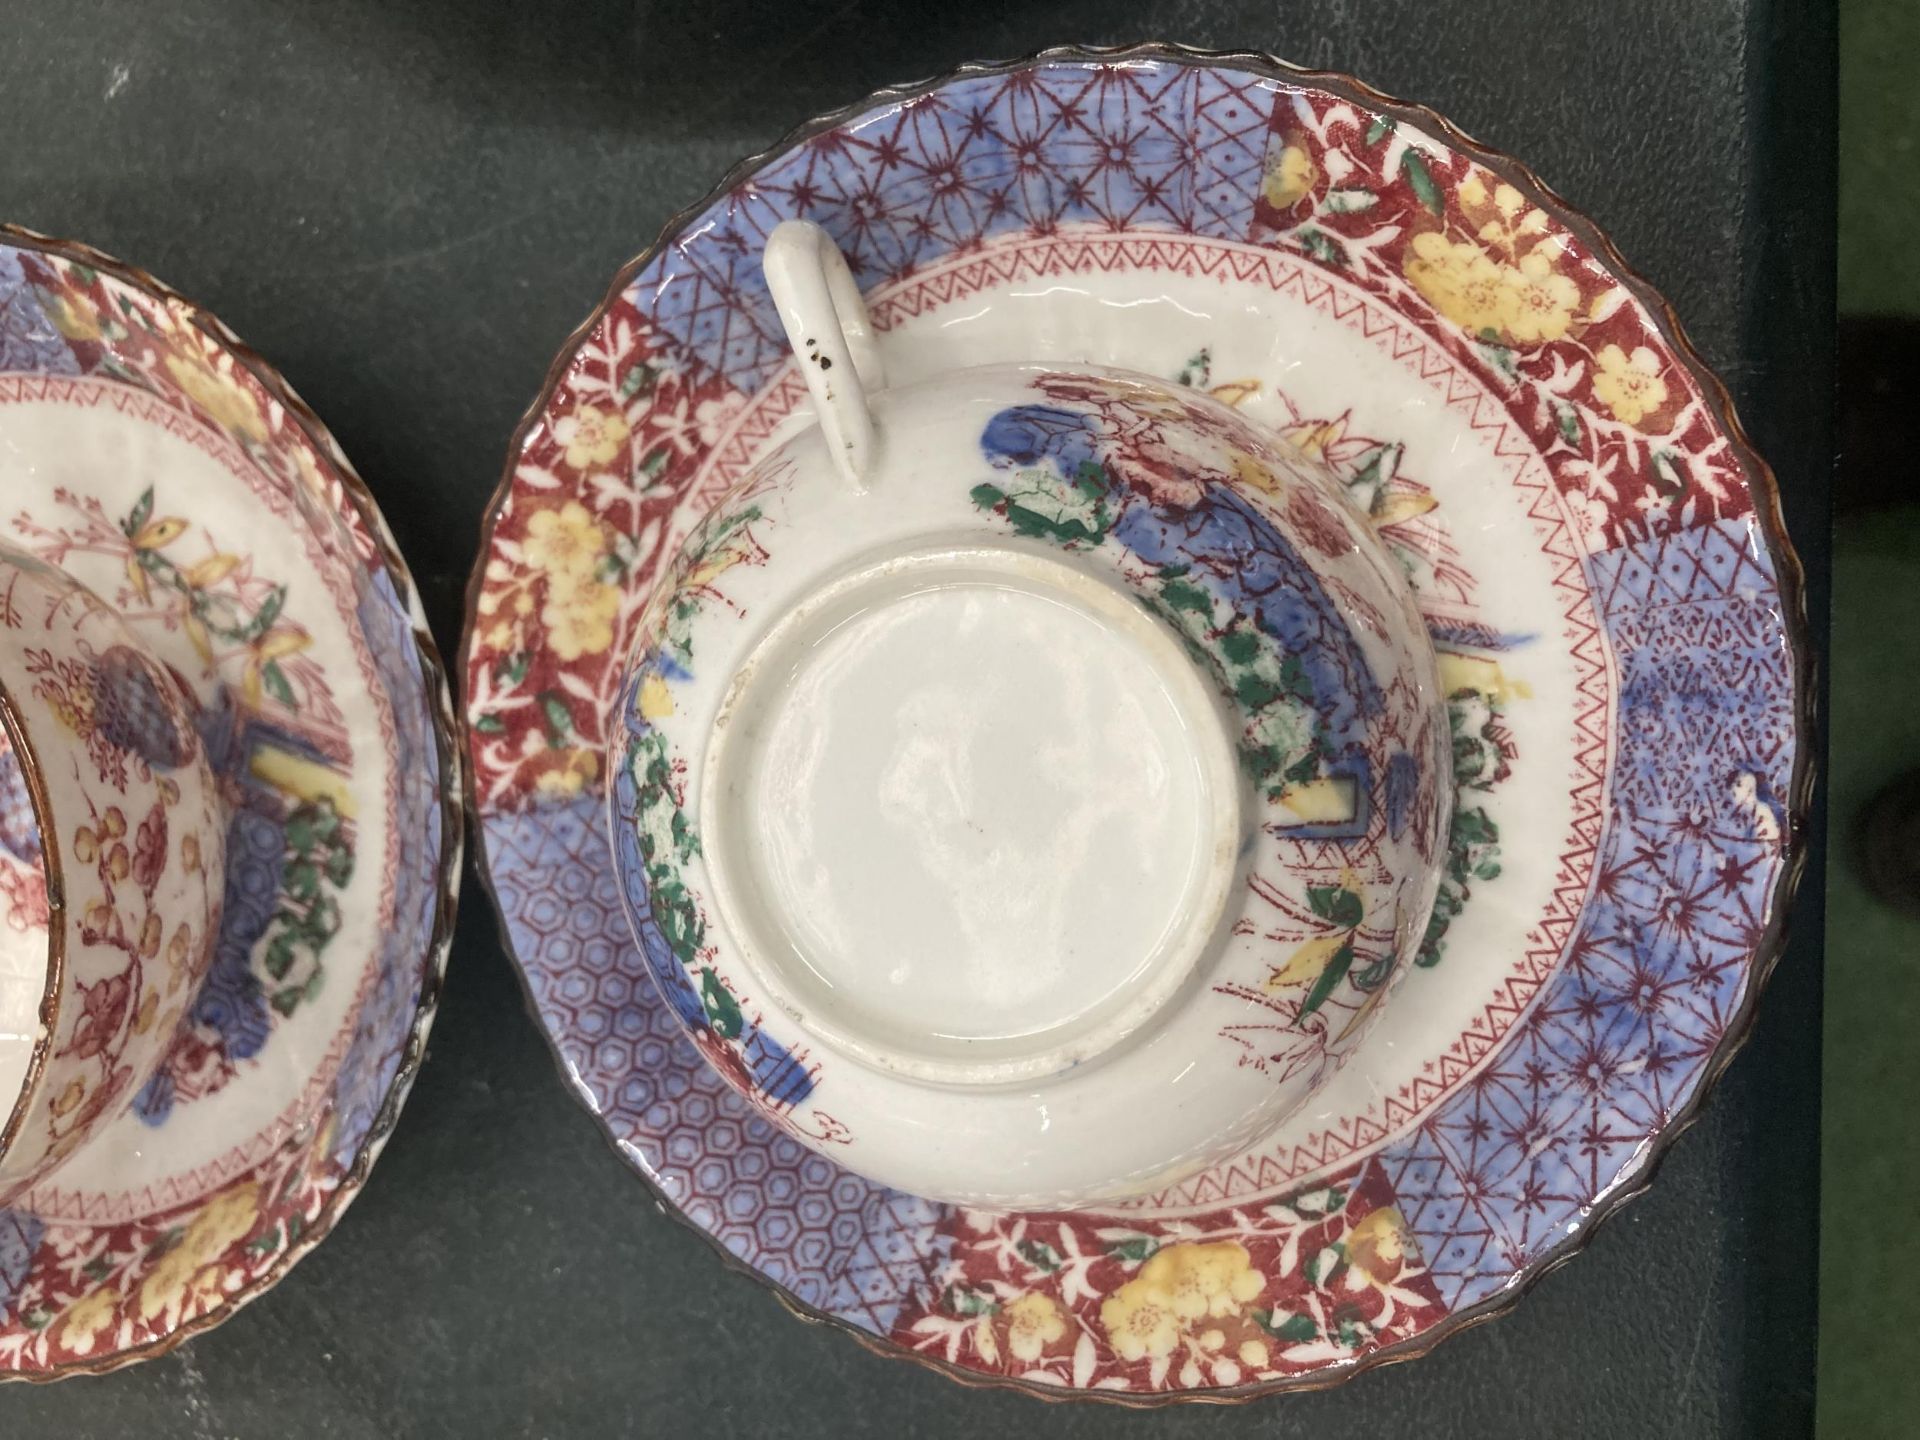 FIVE VINTAGE CHINA CUPS AND SAUCERS - Image 4 of 4